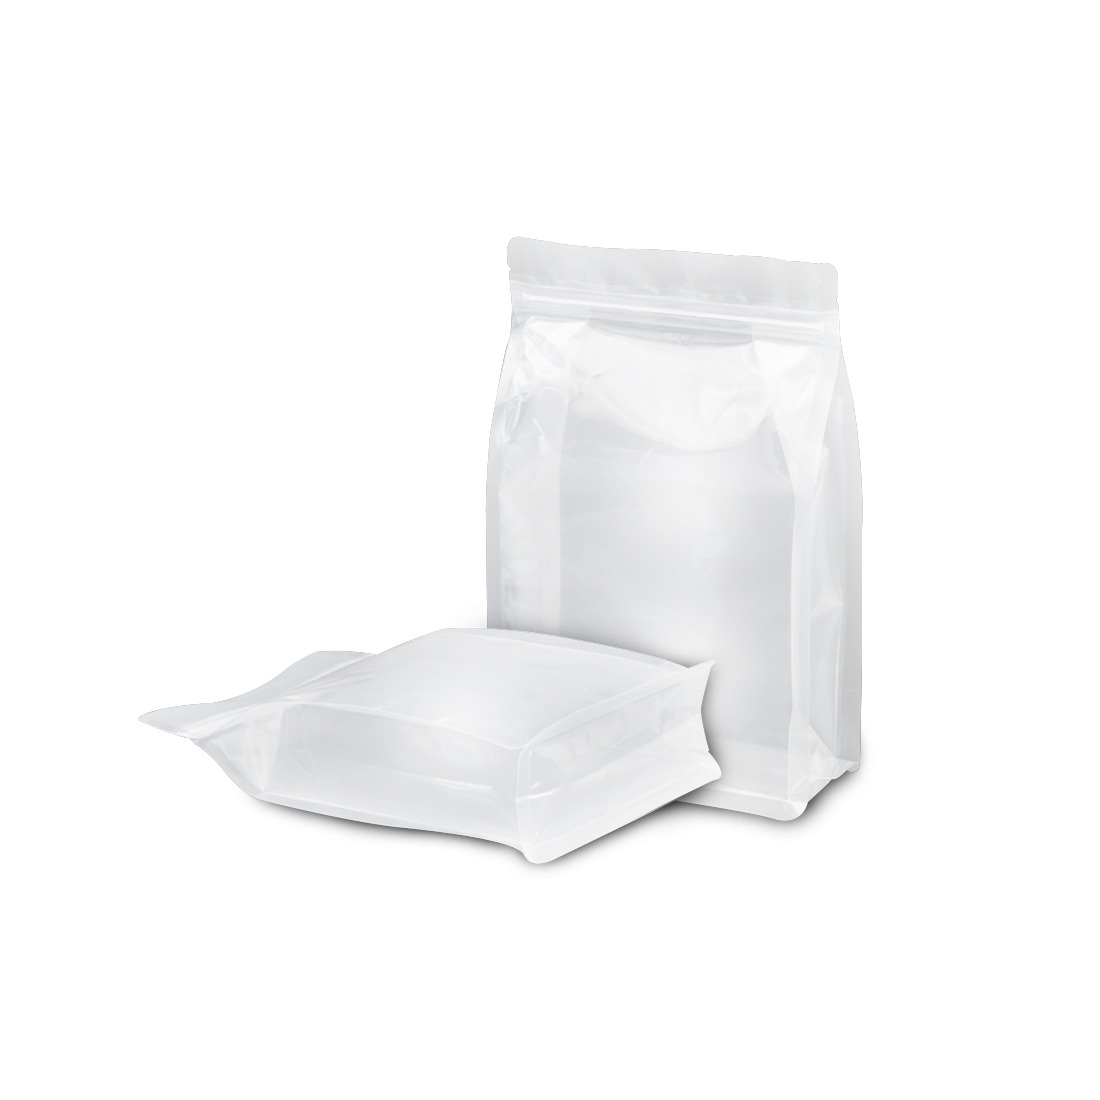 5.5" Inch X 9" Inch Transparent Flat Bottom Pouch with Zipper